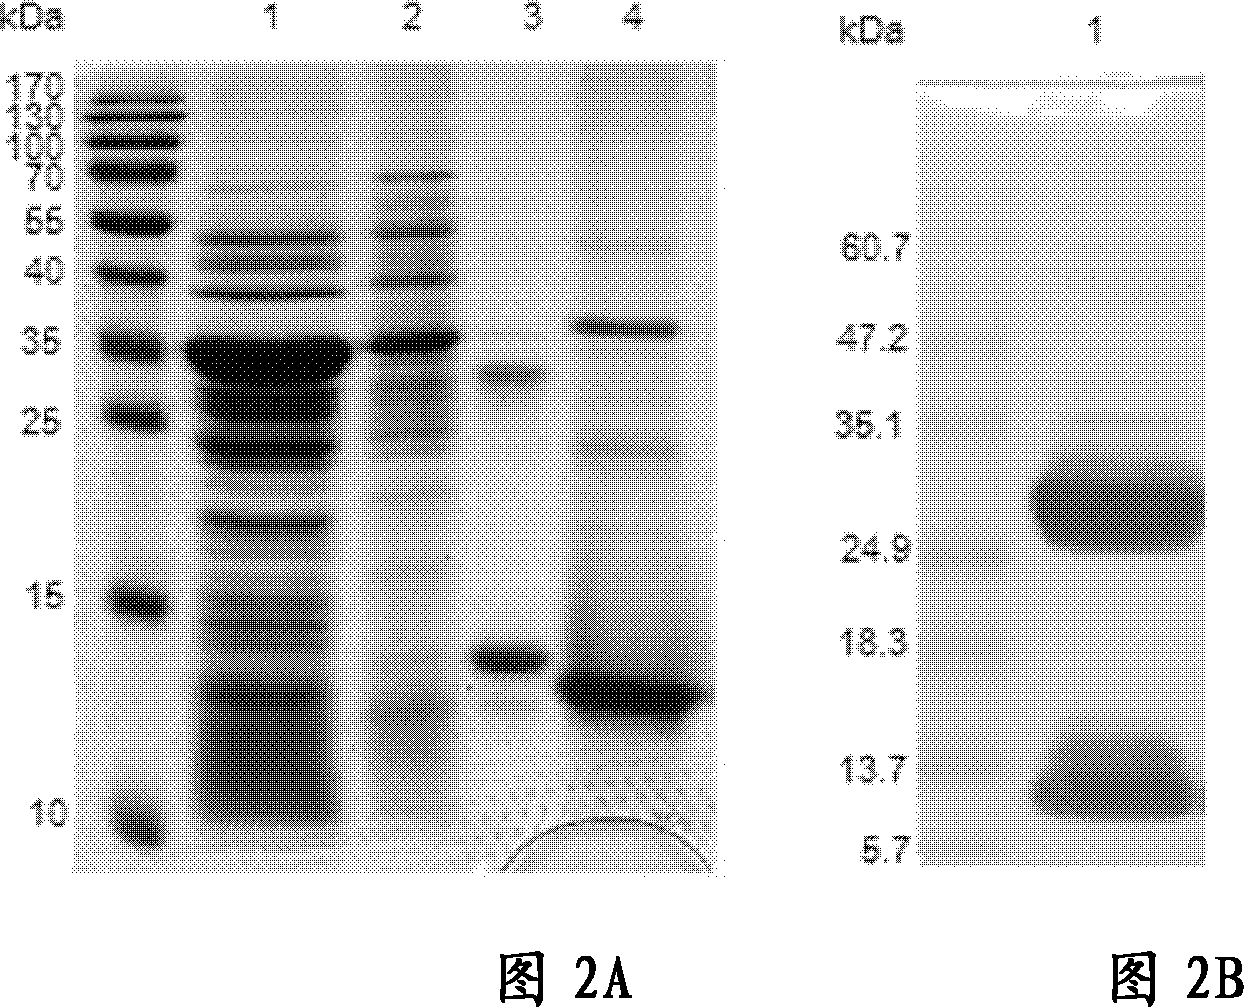 Recombinant fusion protein of IL3 and Lidamycin, preparation method and application thereof